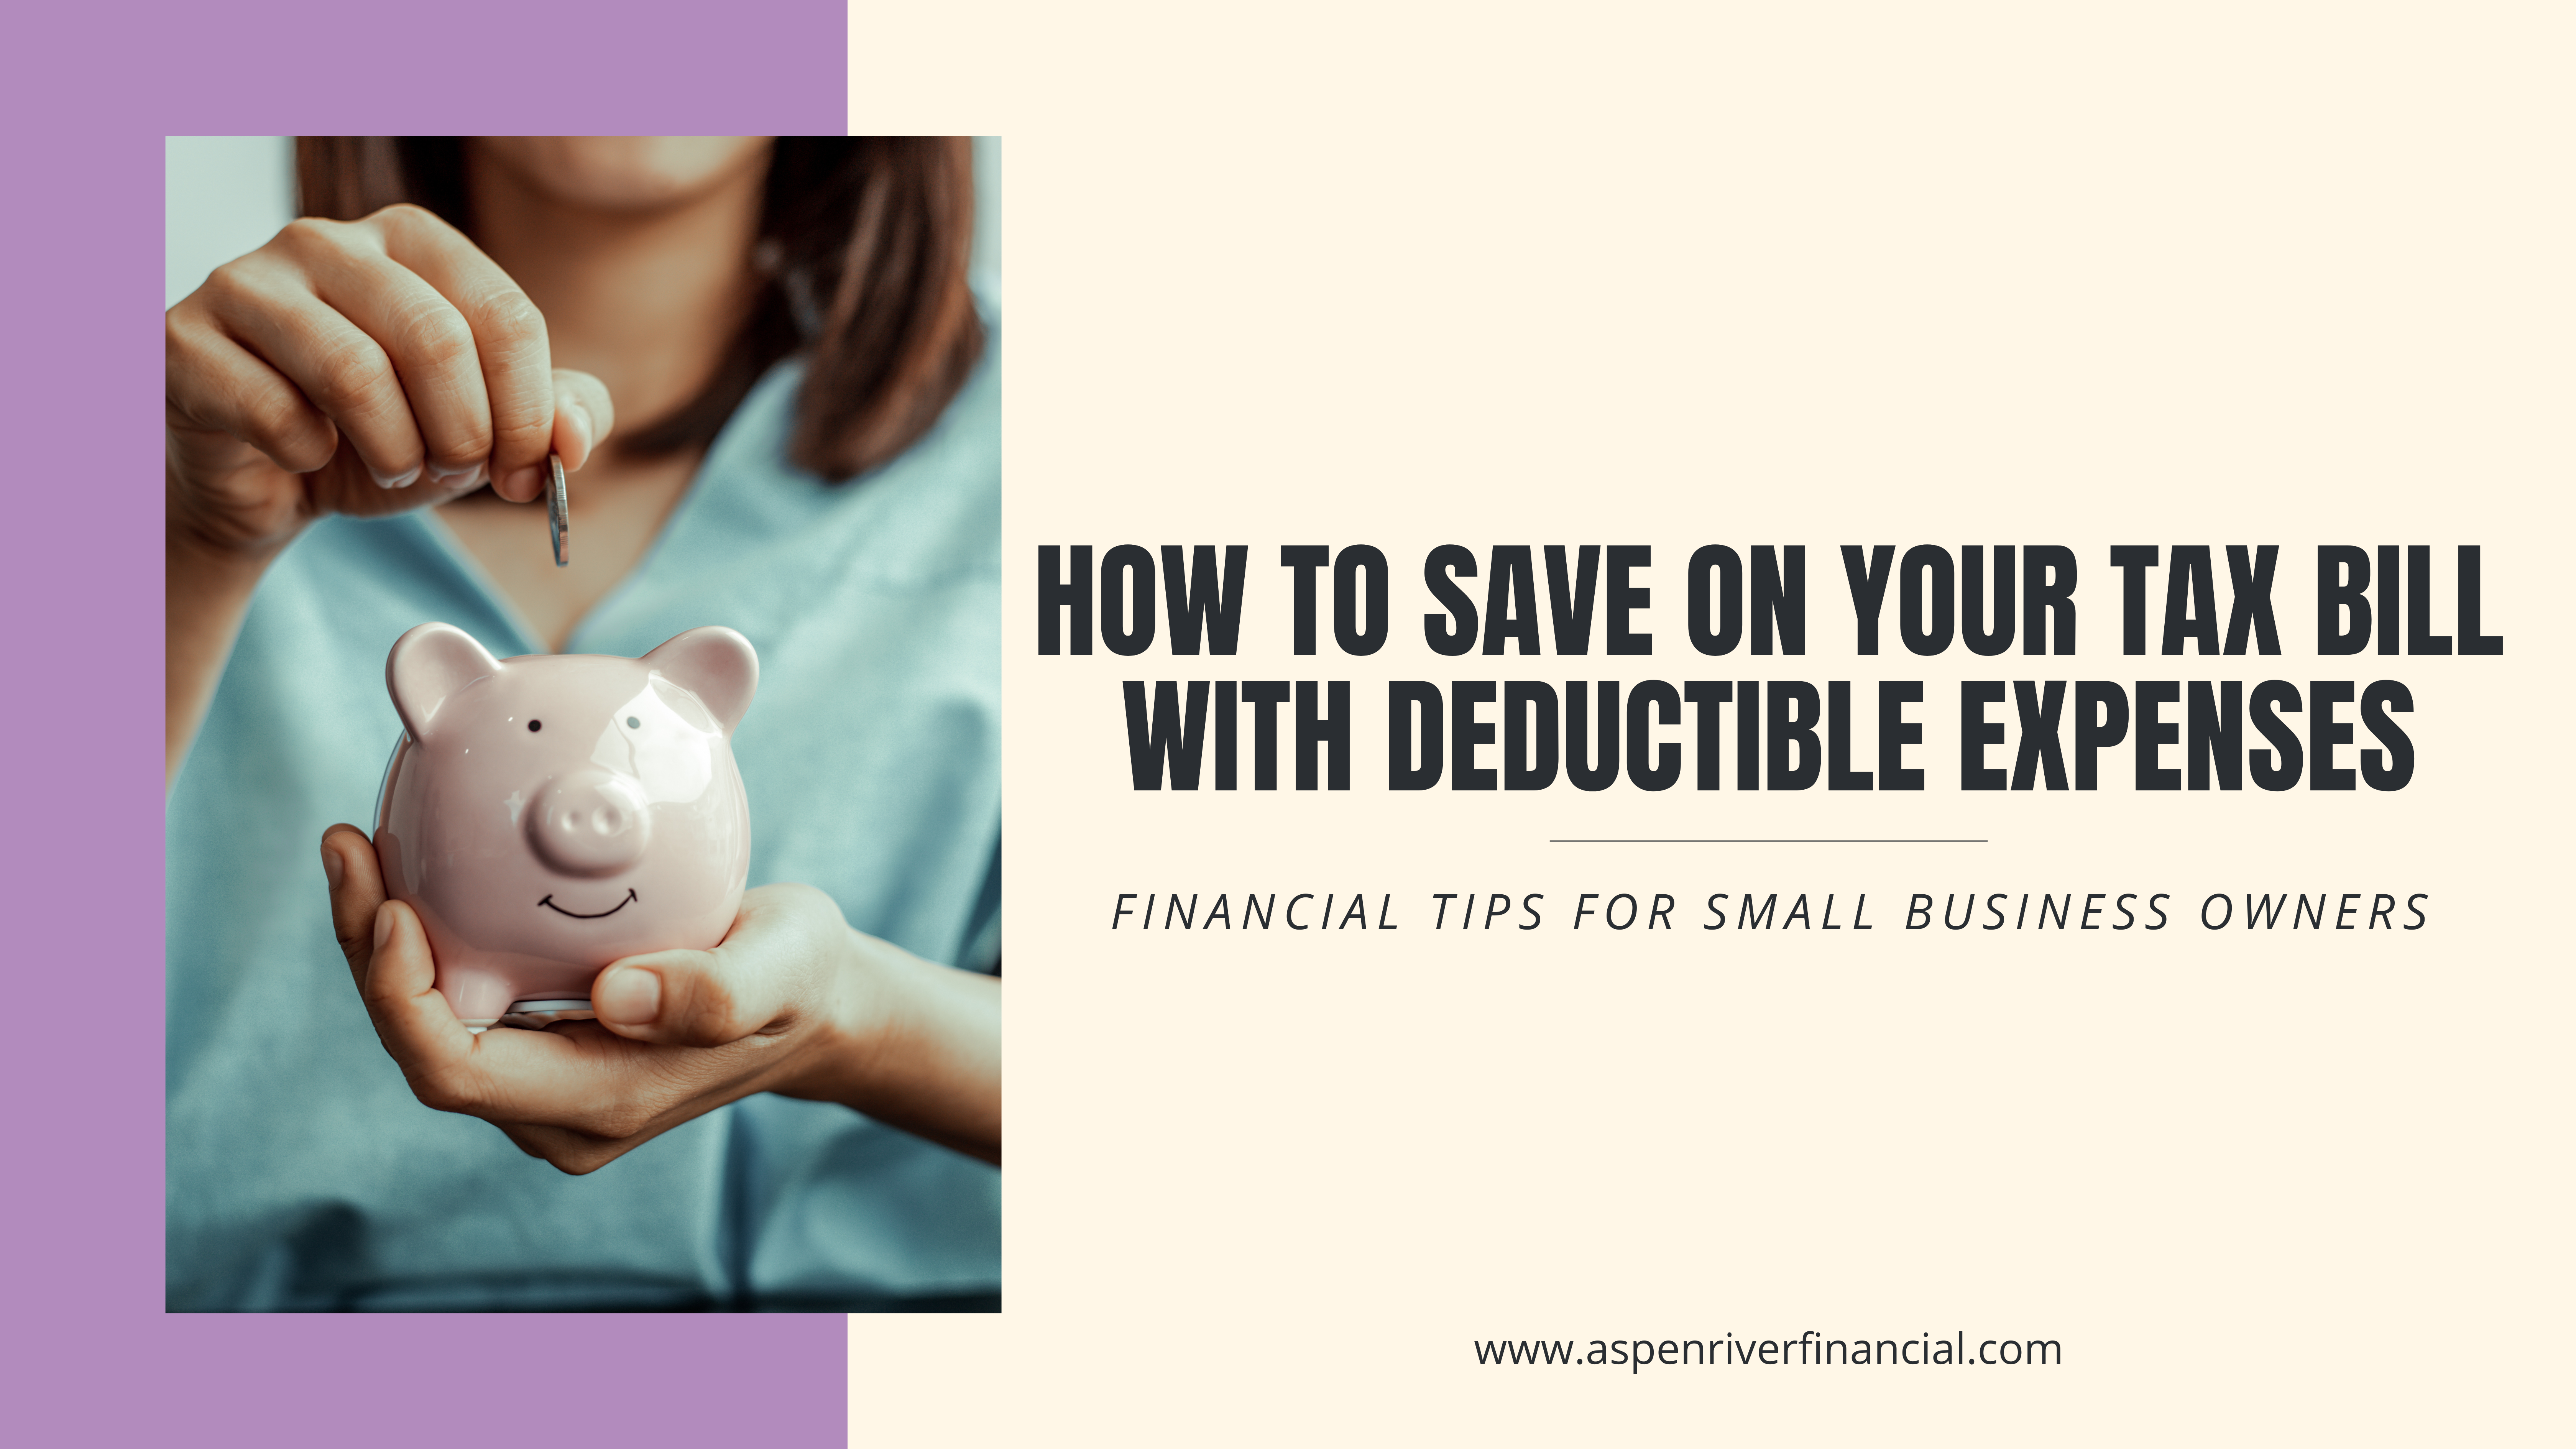 How to save on your tax bill with deductible expenses